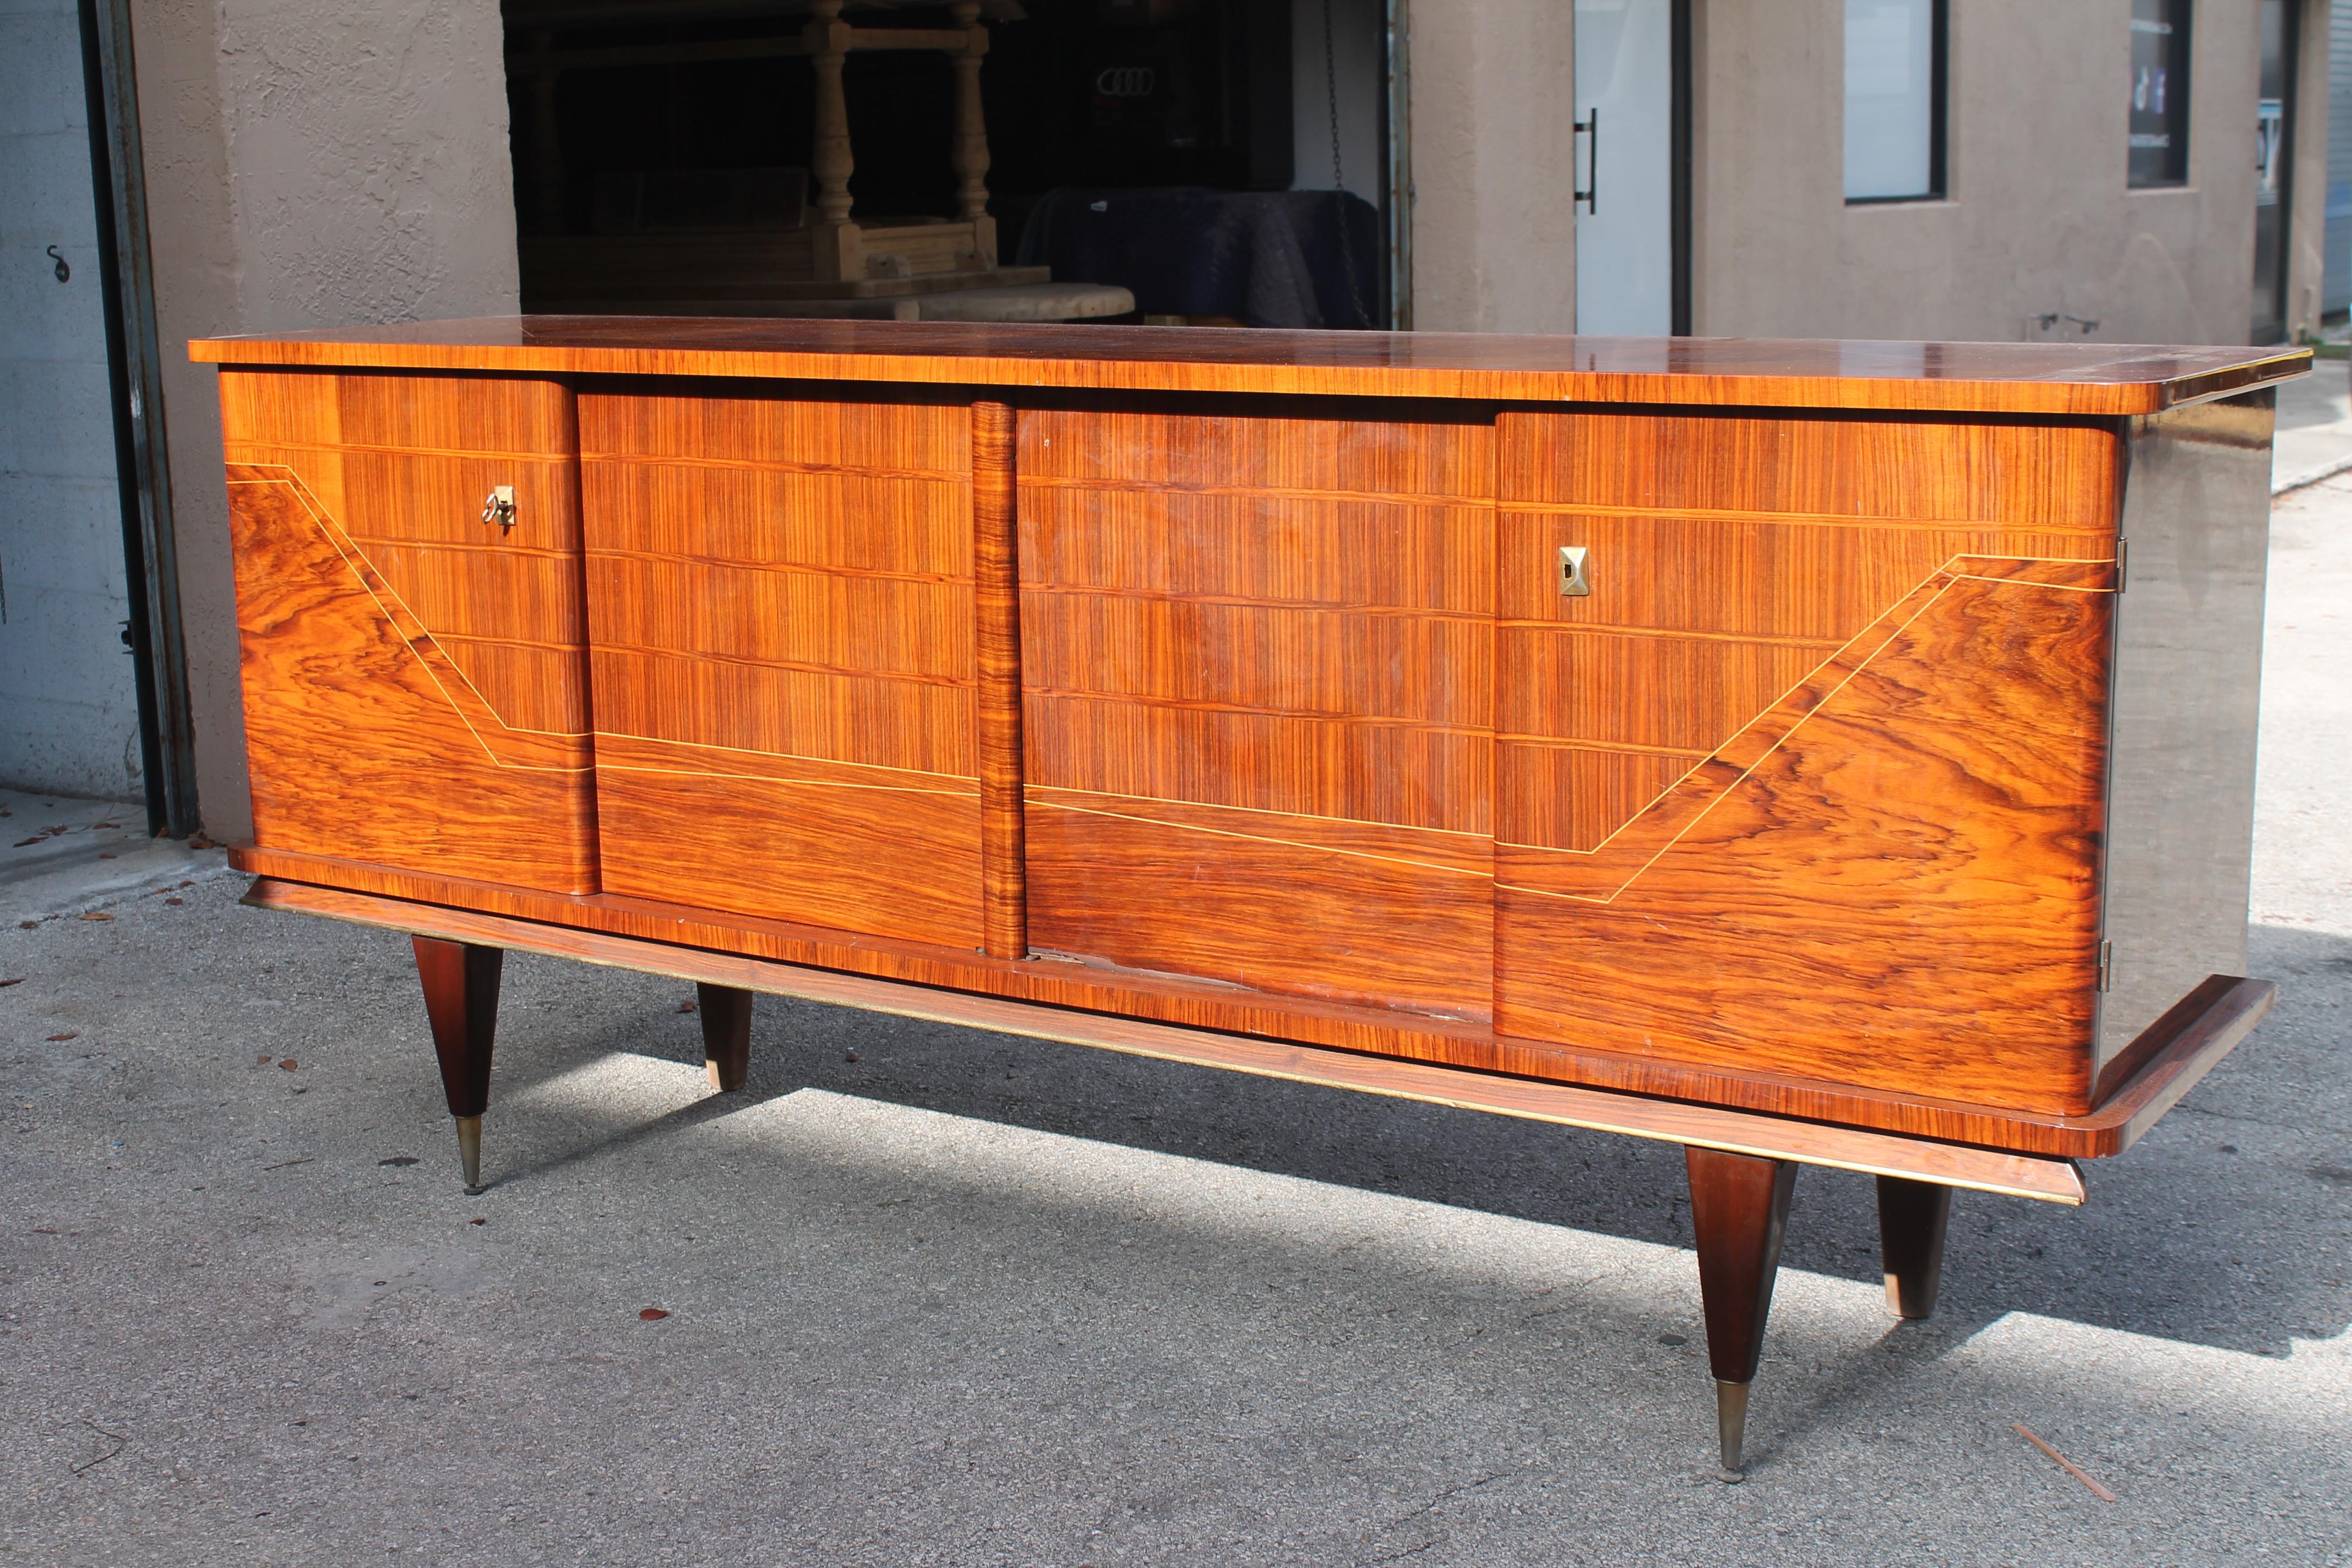 1950's French Art Deco/ Modern Exotic Walnut with Exotic Macassar Ebony Buffet/ Sideboard/ Credenza/ Dry Bar.  4 door/ Lemonwood interior with Bar station, shelves. French Estate.